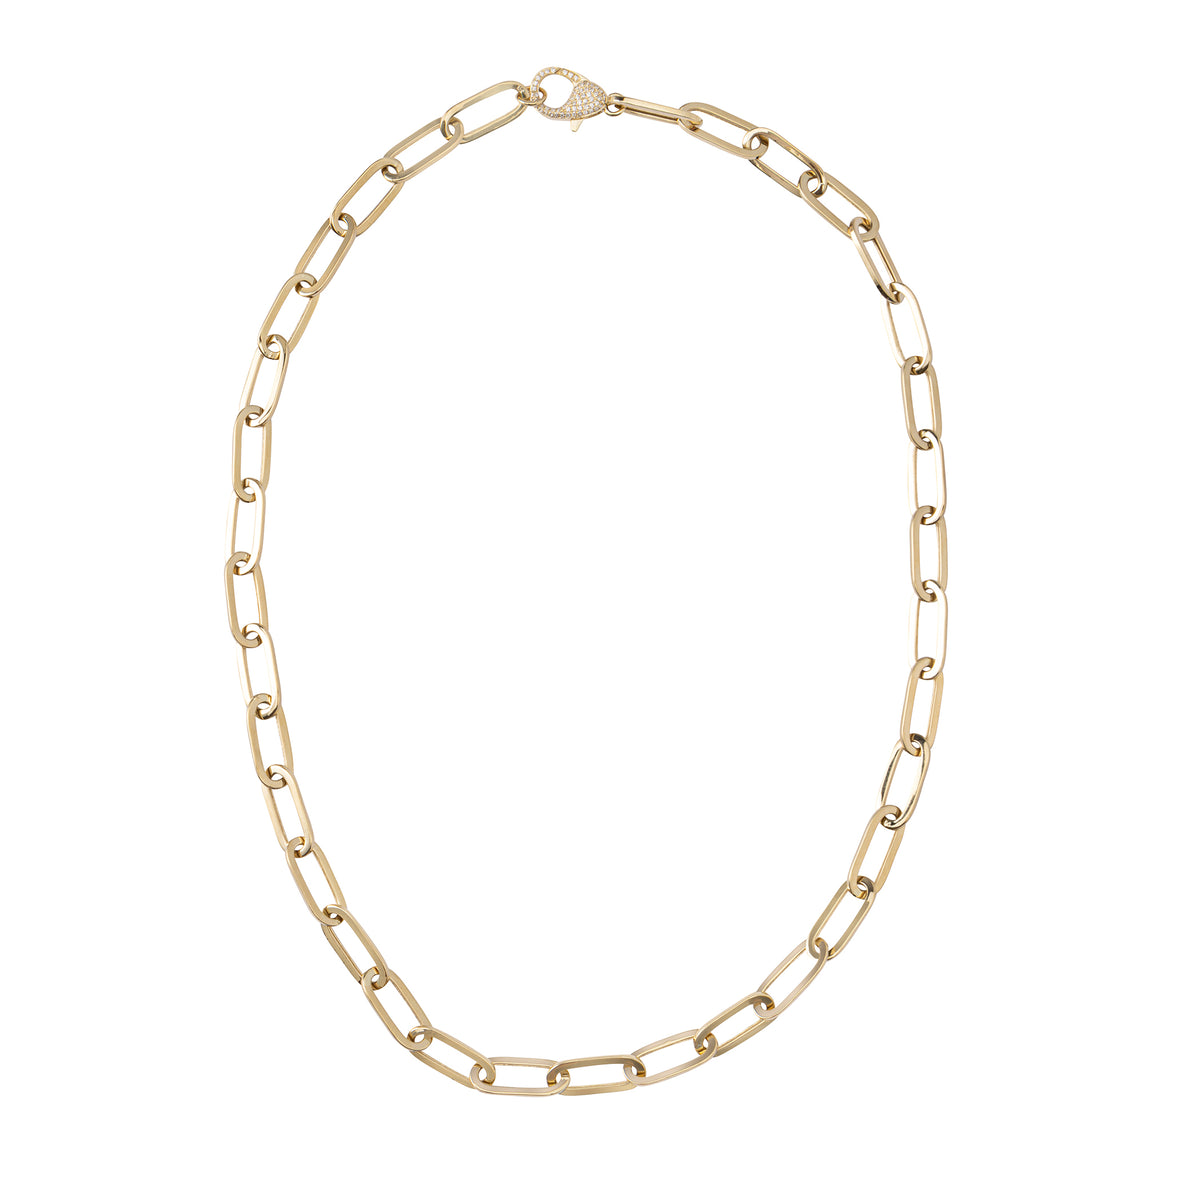 Chain Link Necklace with Pave Clasp